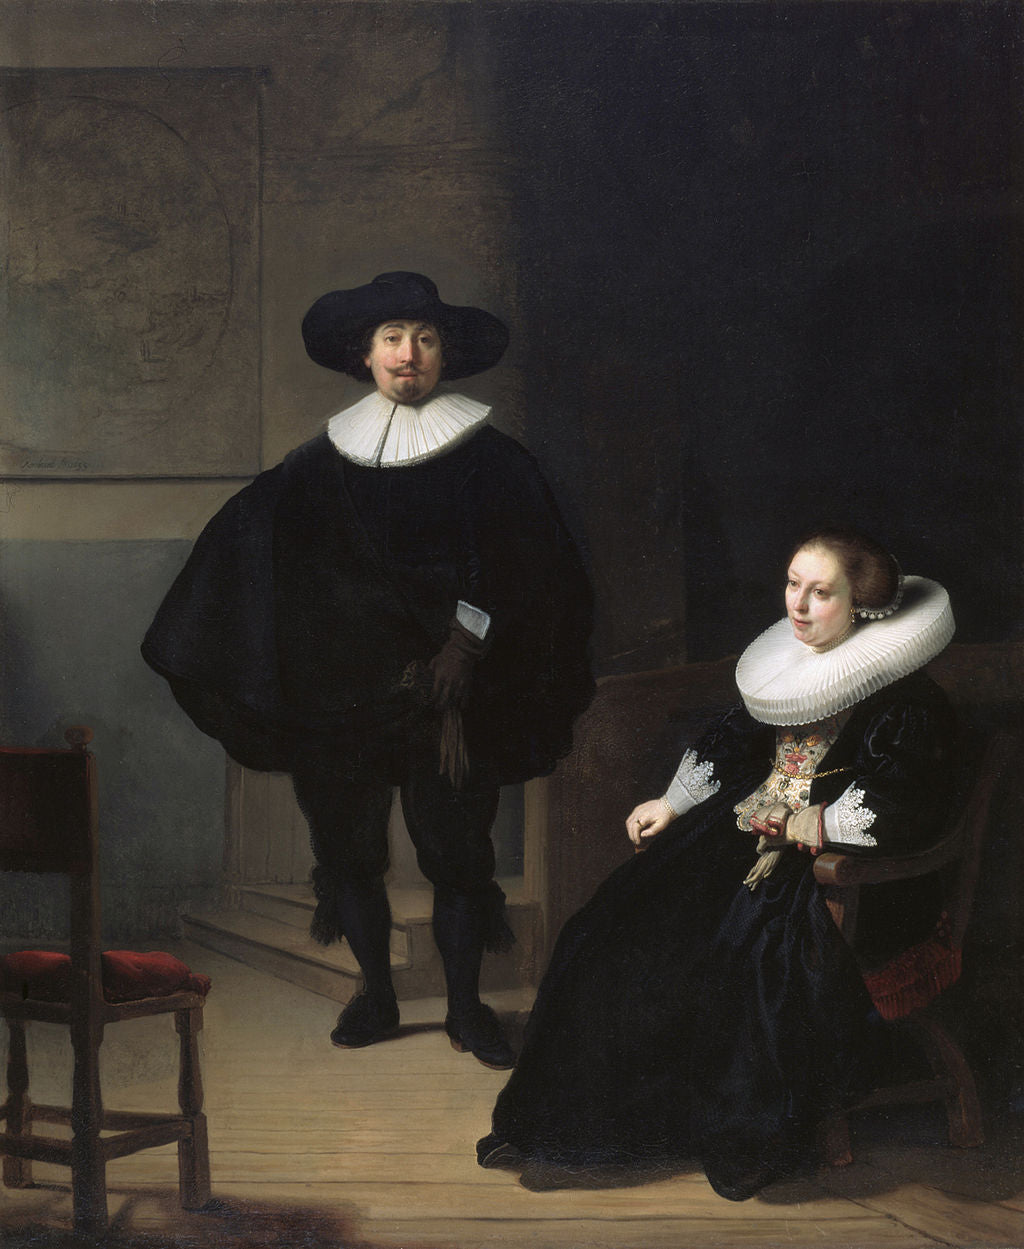 A Lady and Gentleman in Black Painting by Rembrandt Oil on Canvas Reproduction